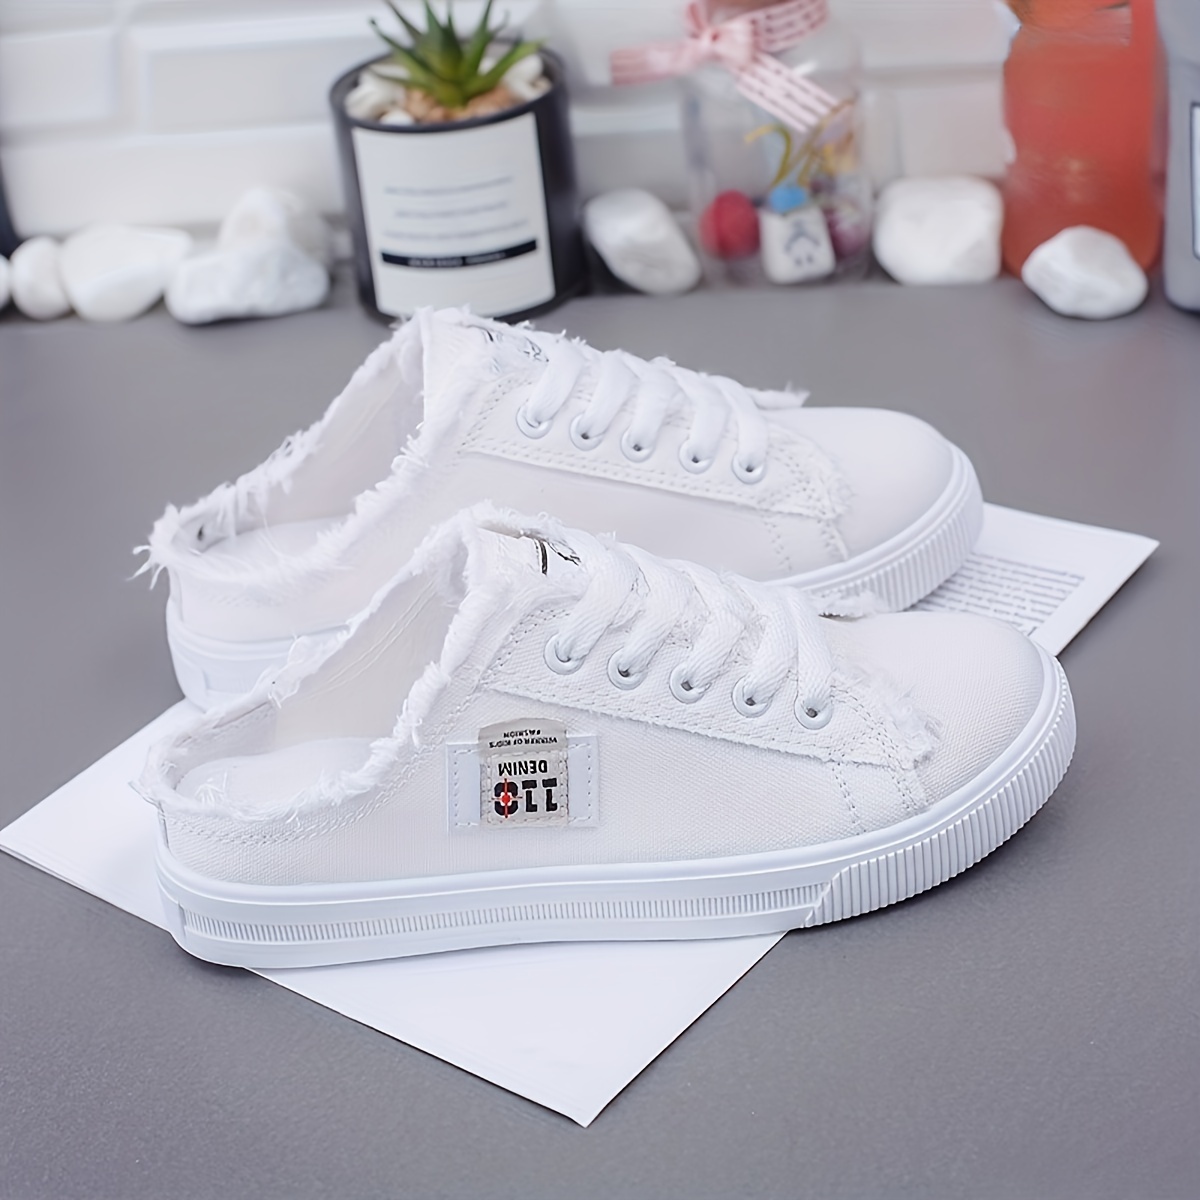 

Women's Simple Canvas Shoes, Casual Lace Up Mule Sneakers, Women's Comfortable Outdoor Shoes